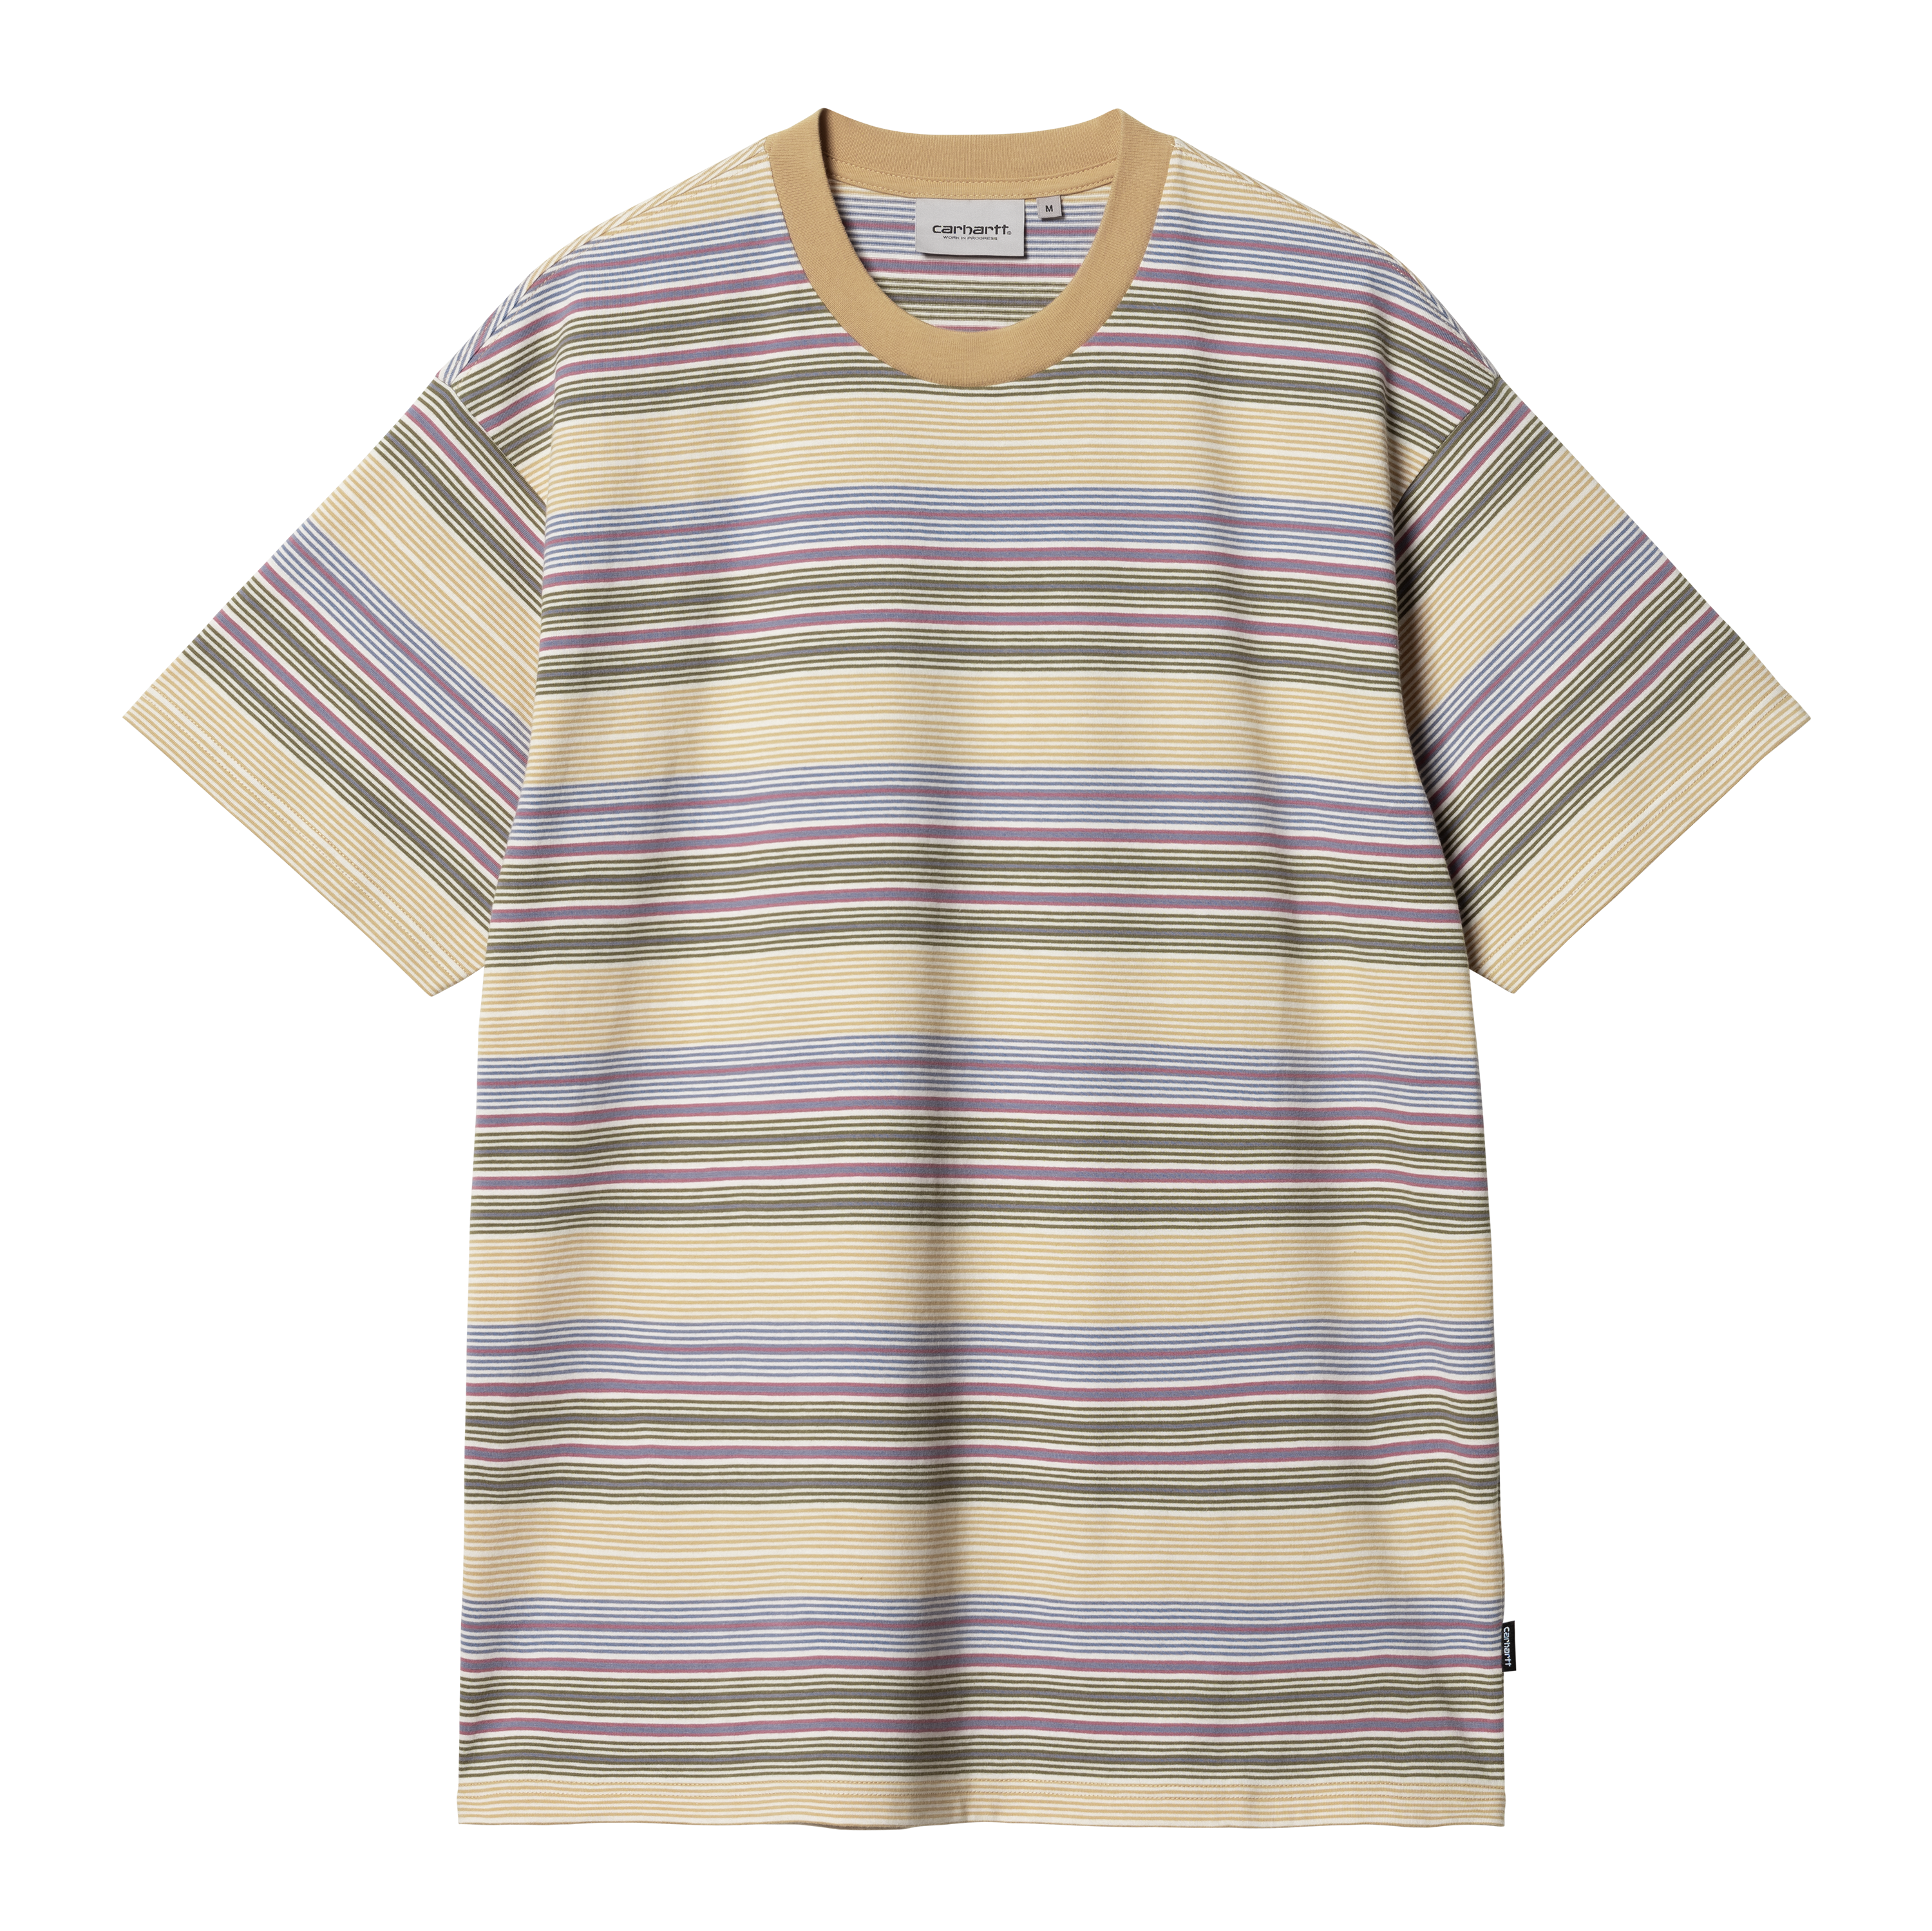 Carhartt WIP Short Sleeve Coby T-Shirt in Multicolor